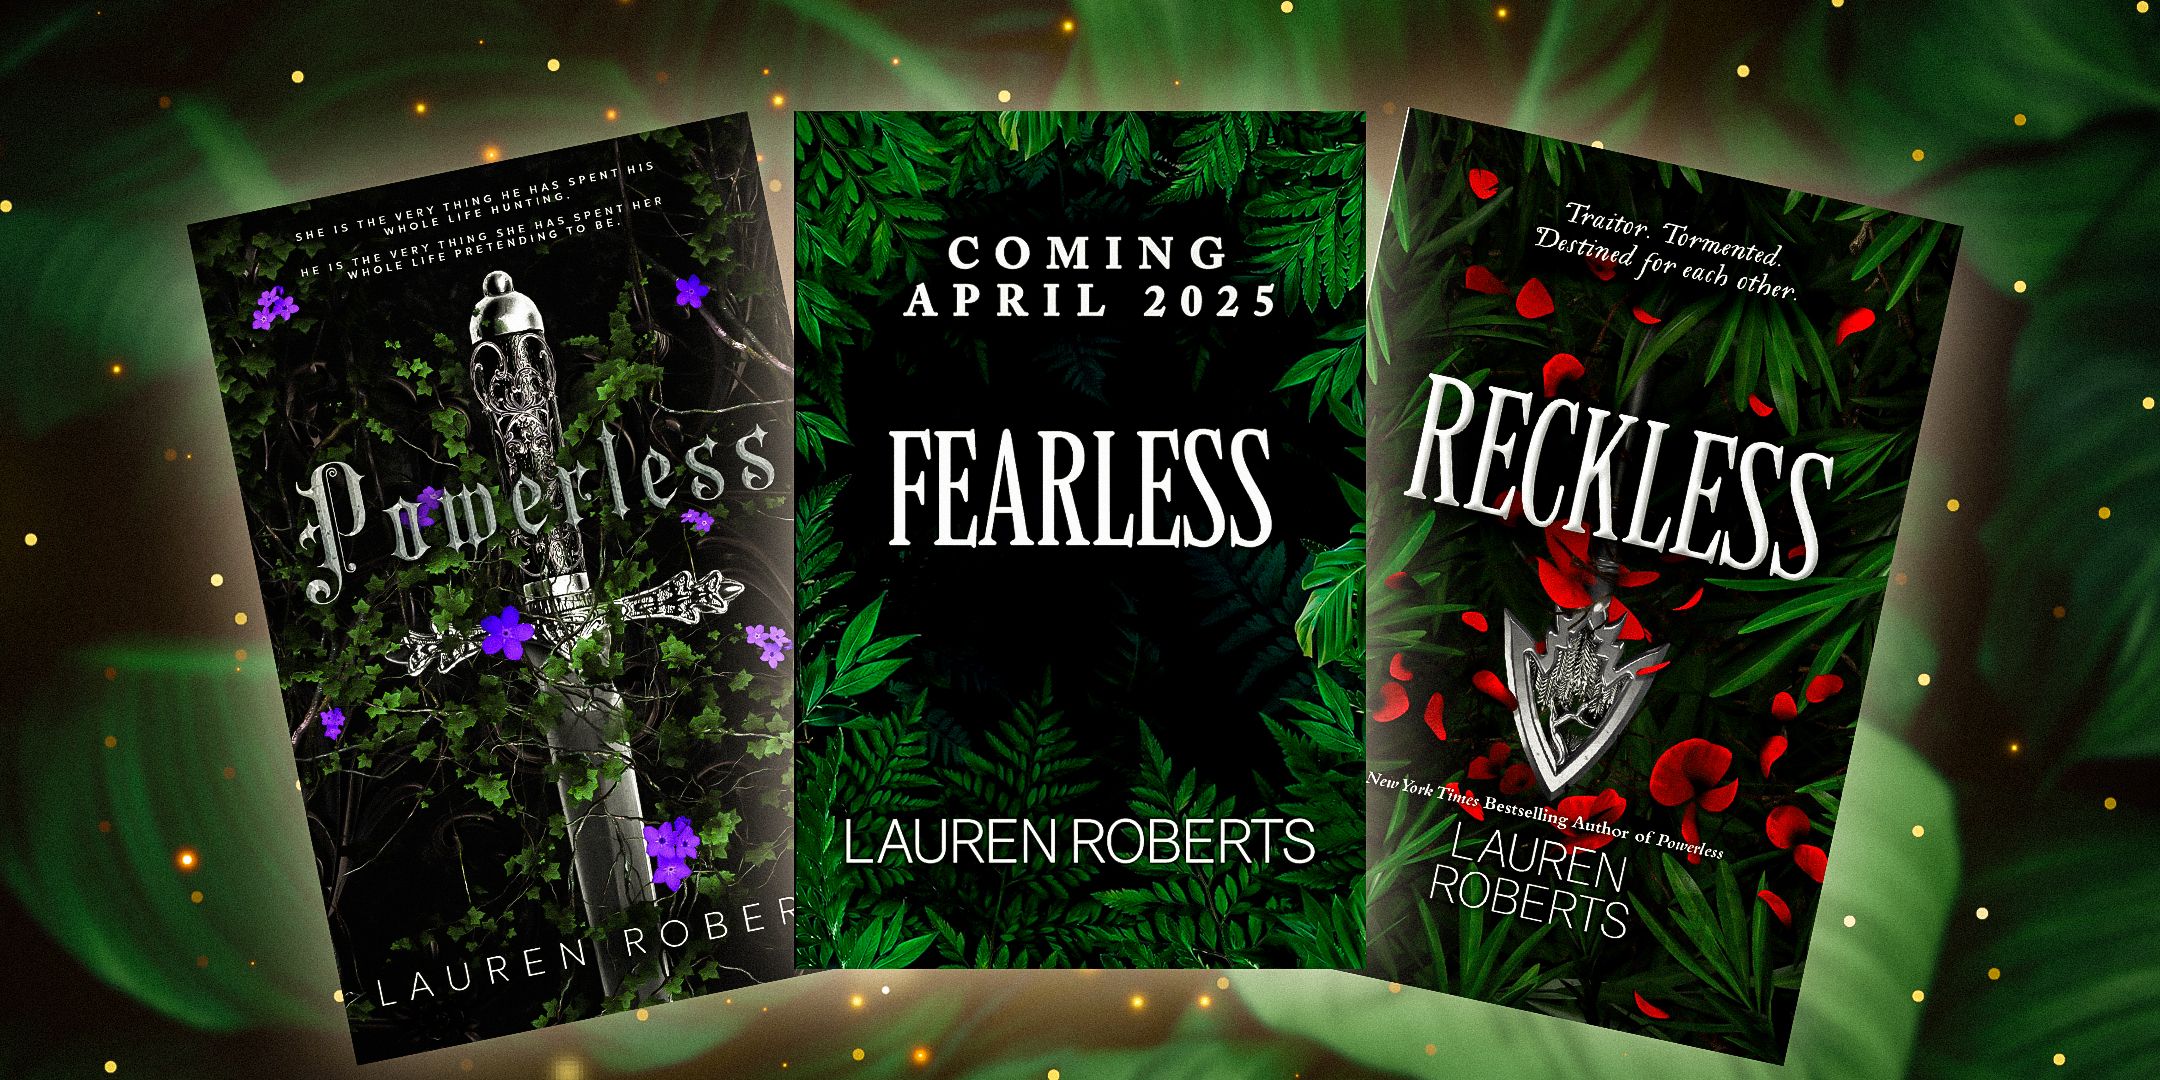 The covers of Powerless and Reckless by Lauren Roberts with the promo image for Fearless on the front